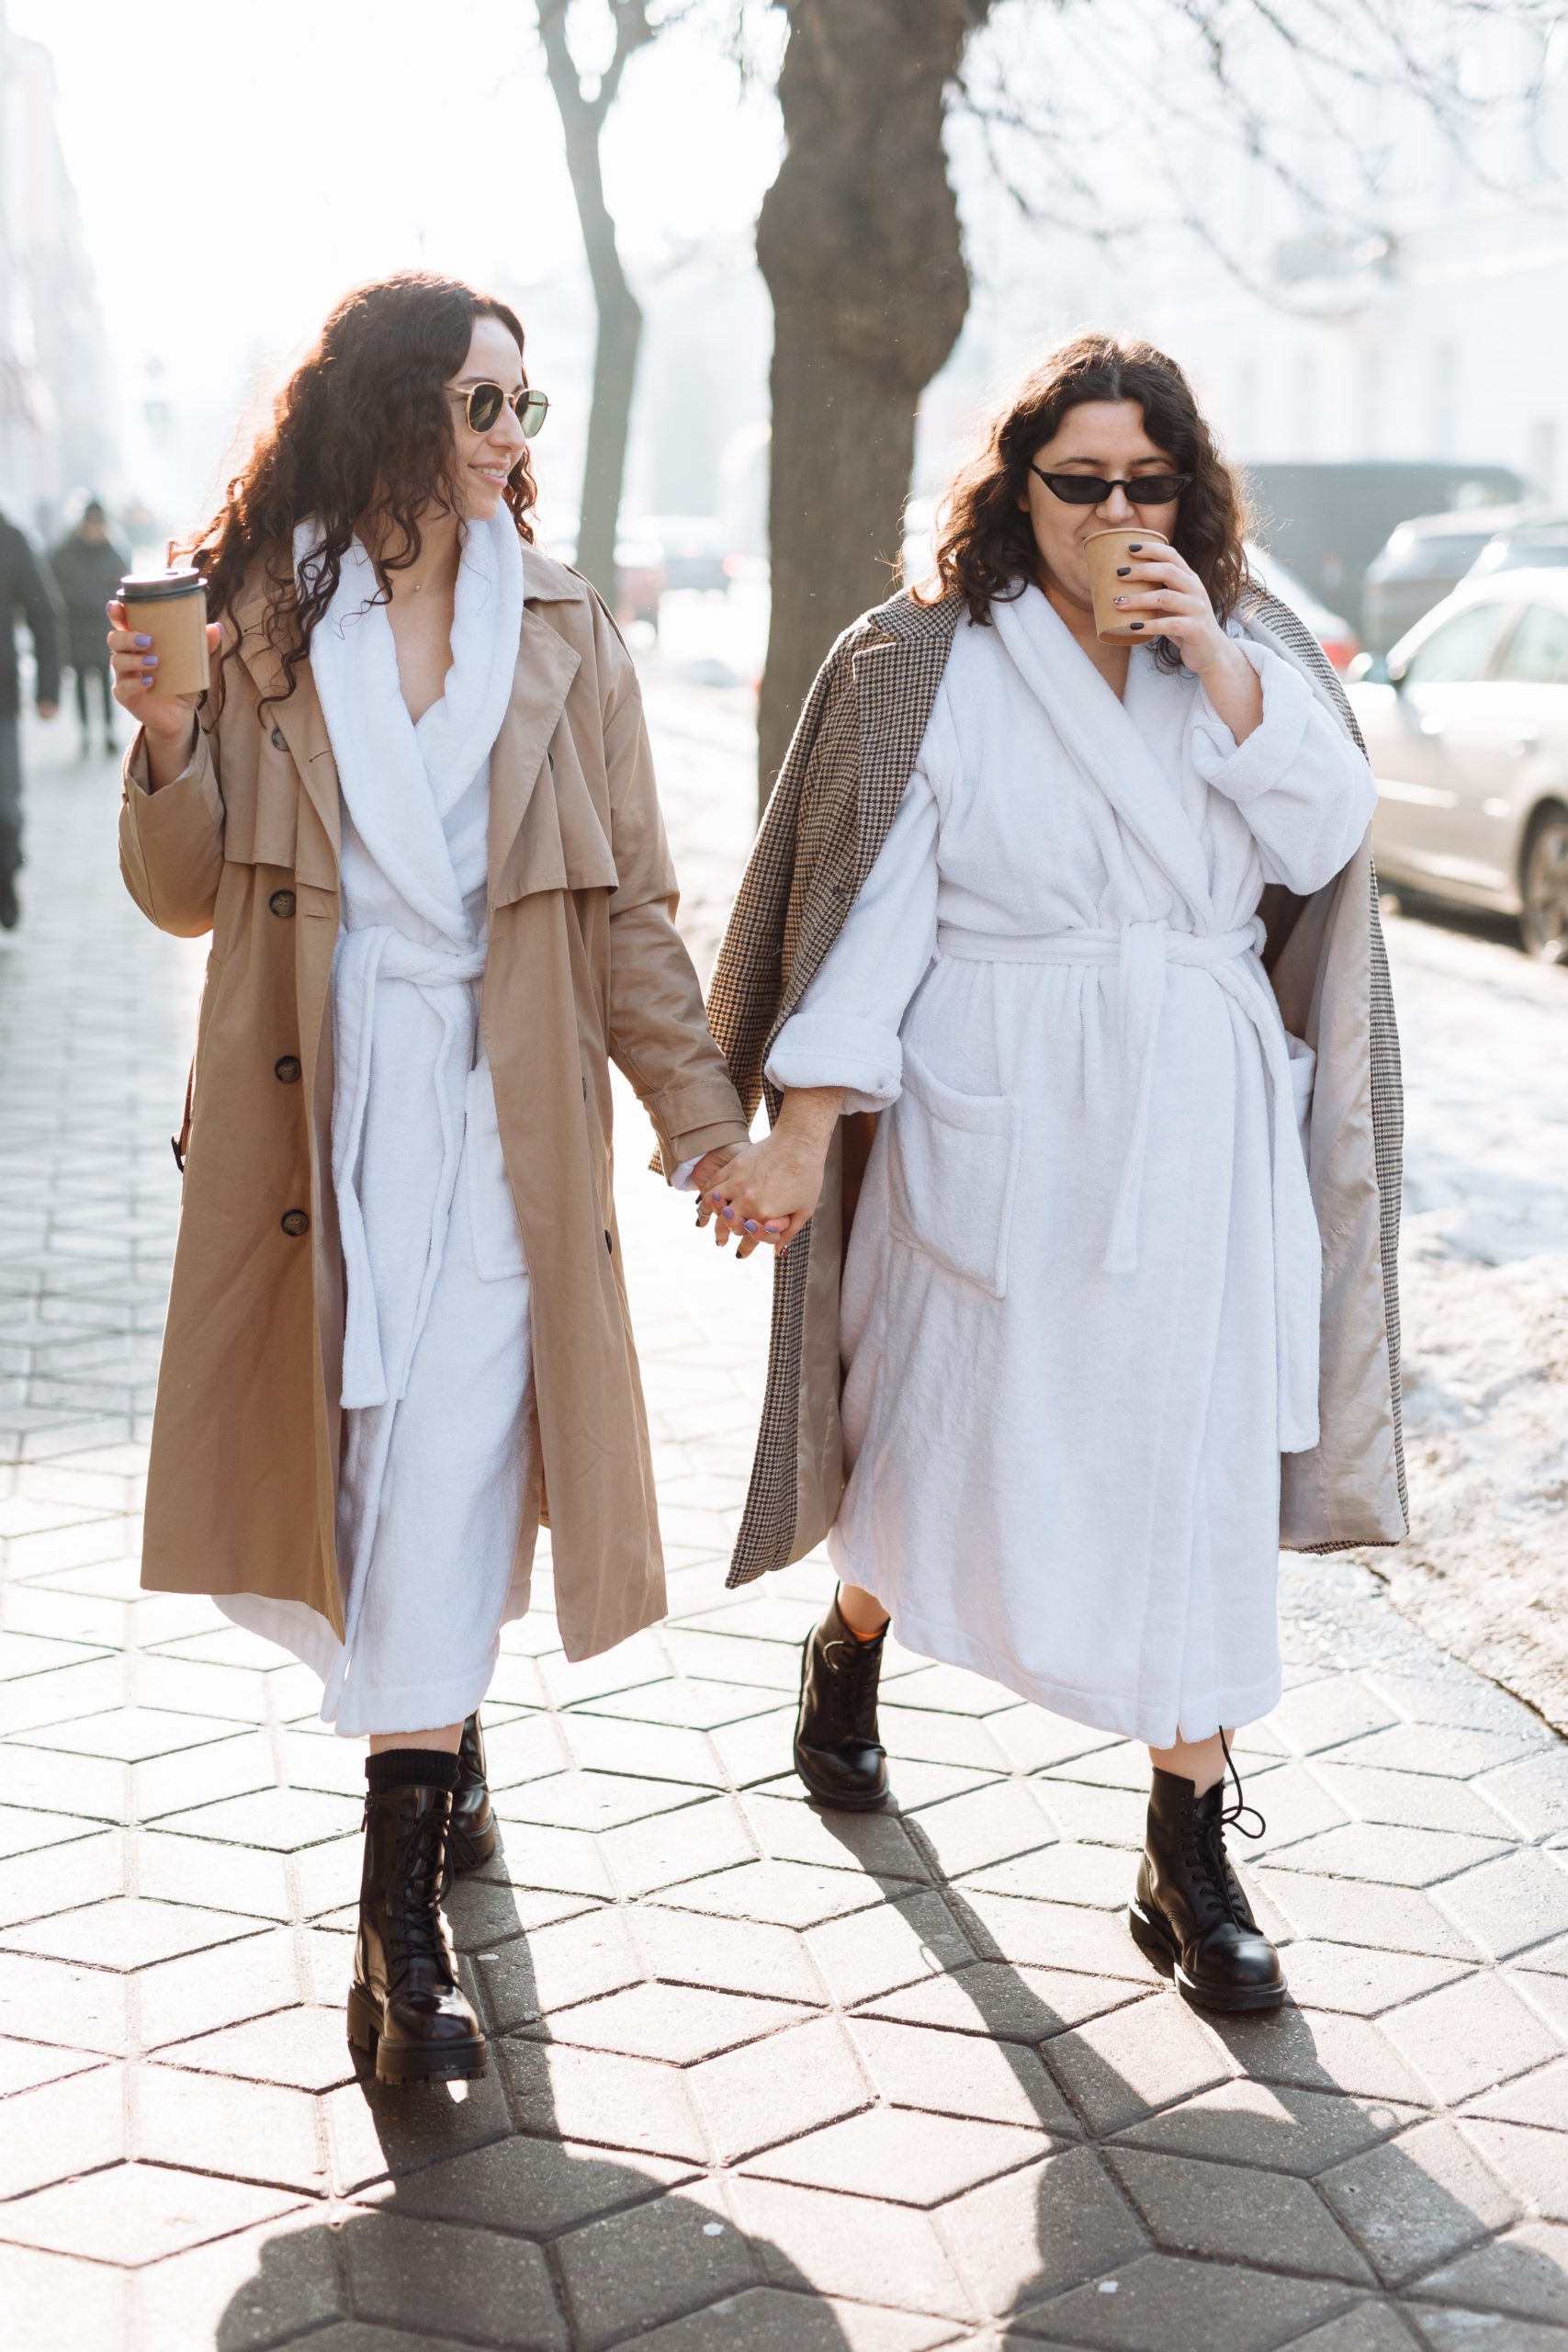 8 Classic Coats That Are Great Additions to a Capsule Wardrobe